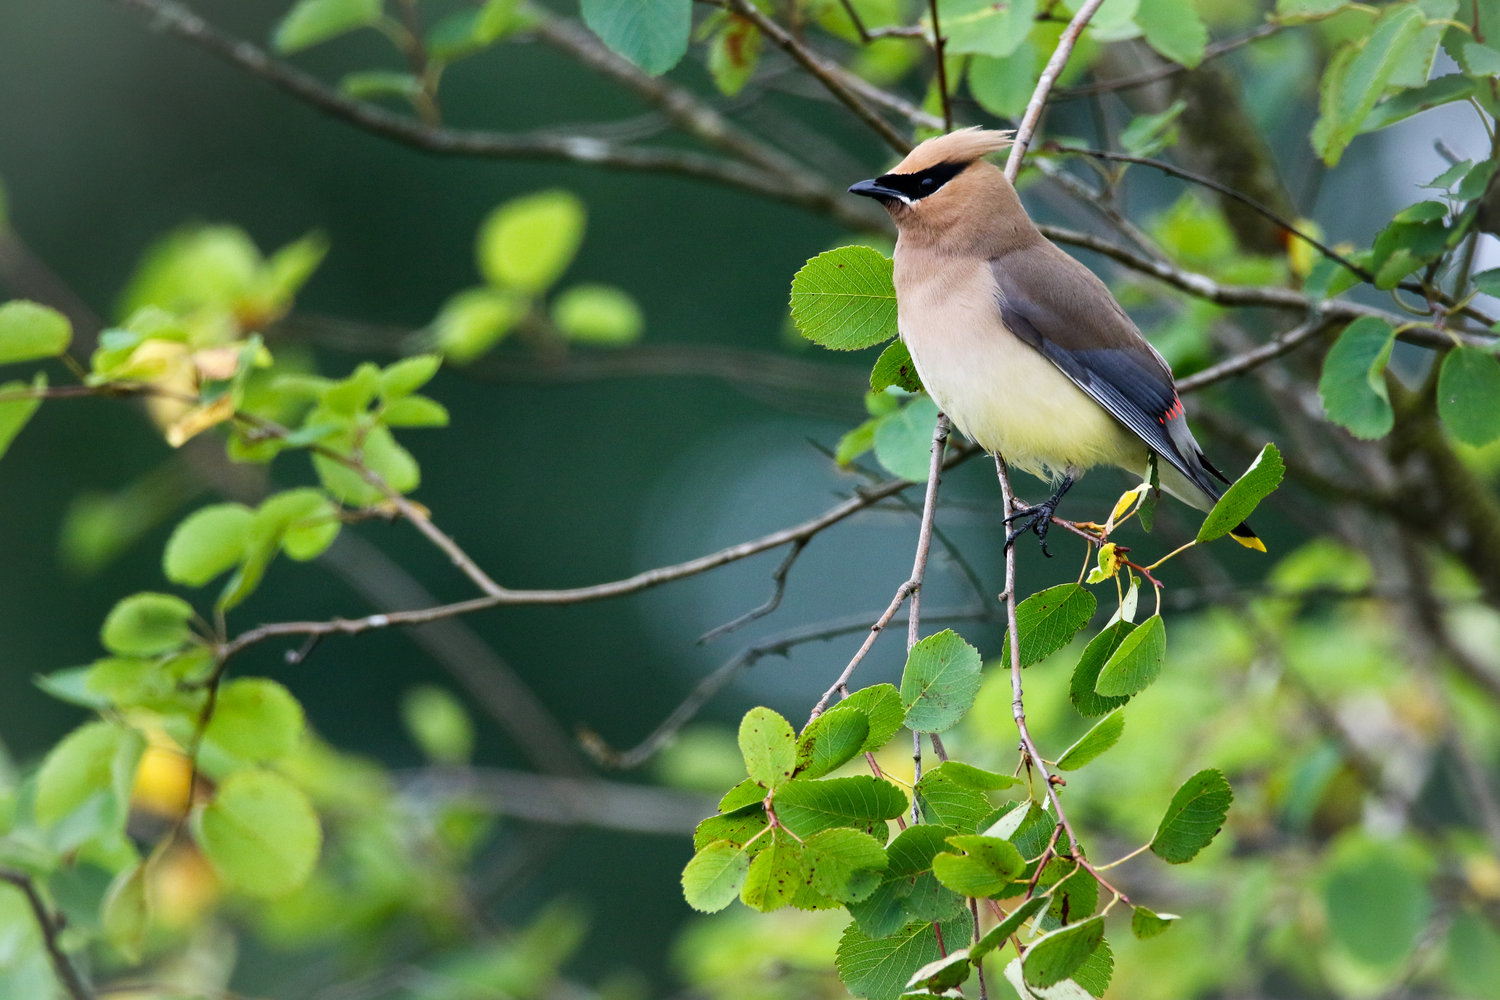 This is the Cedar Waxwing.